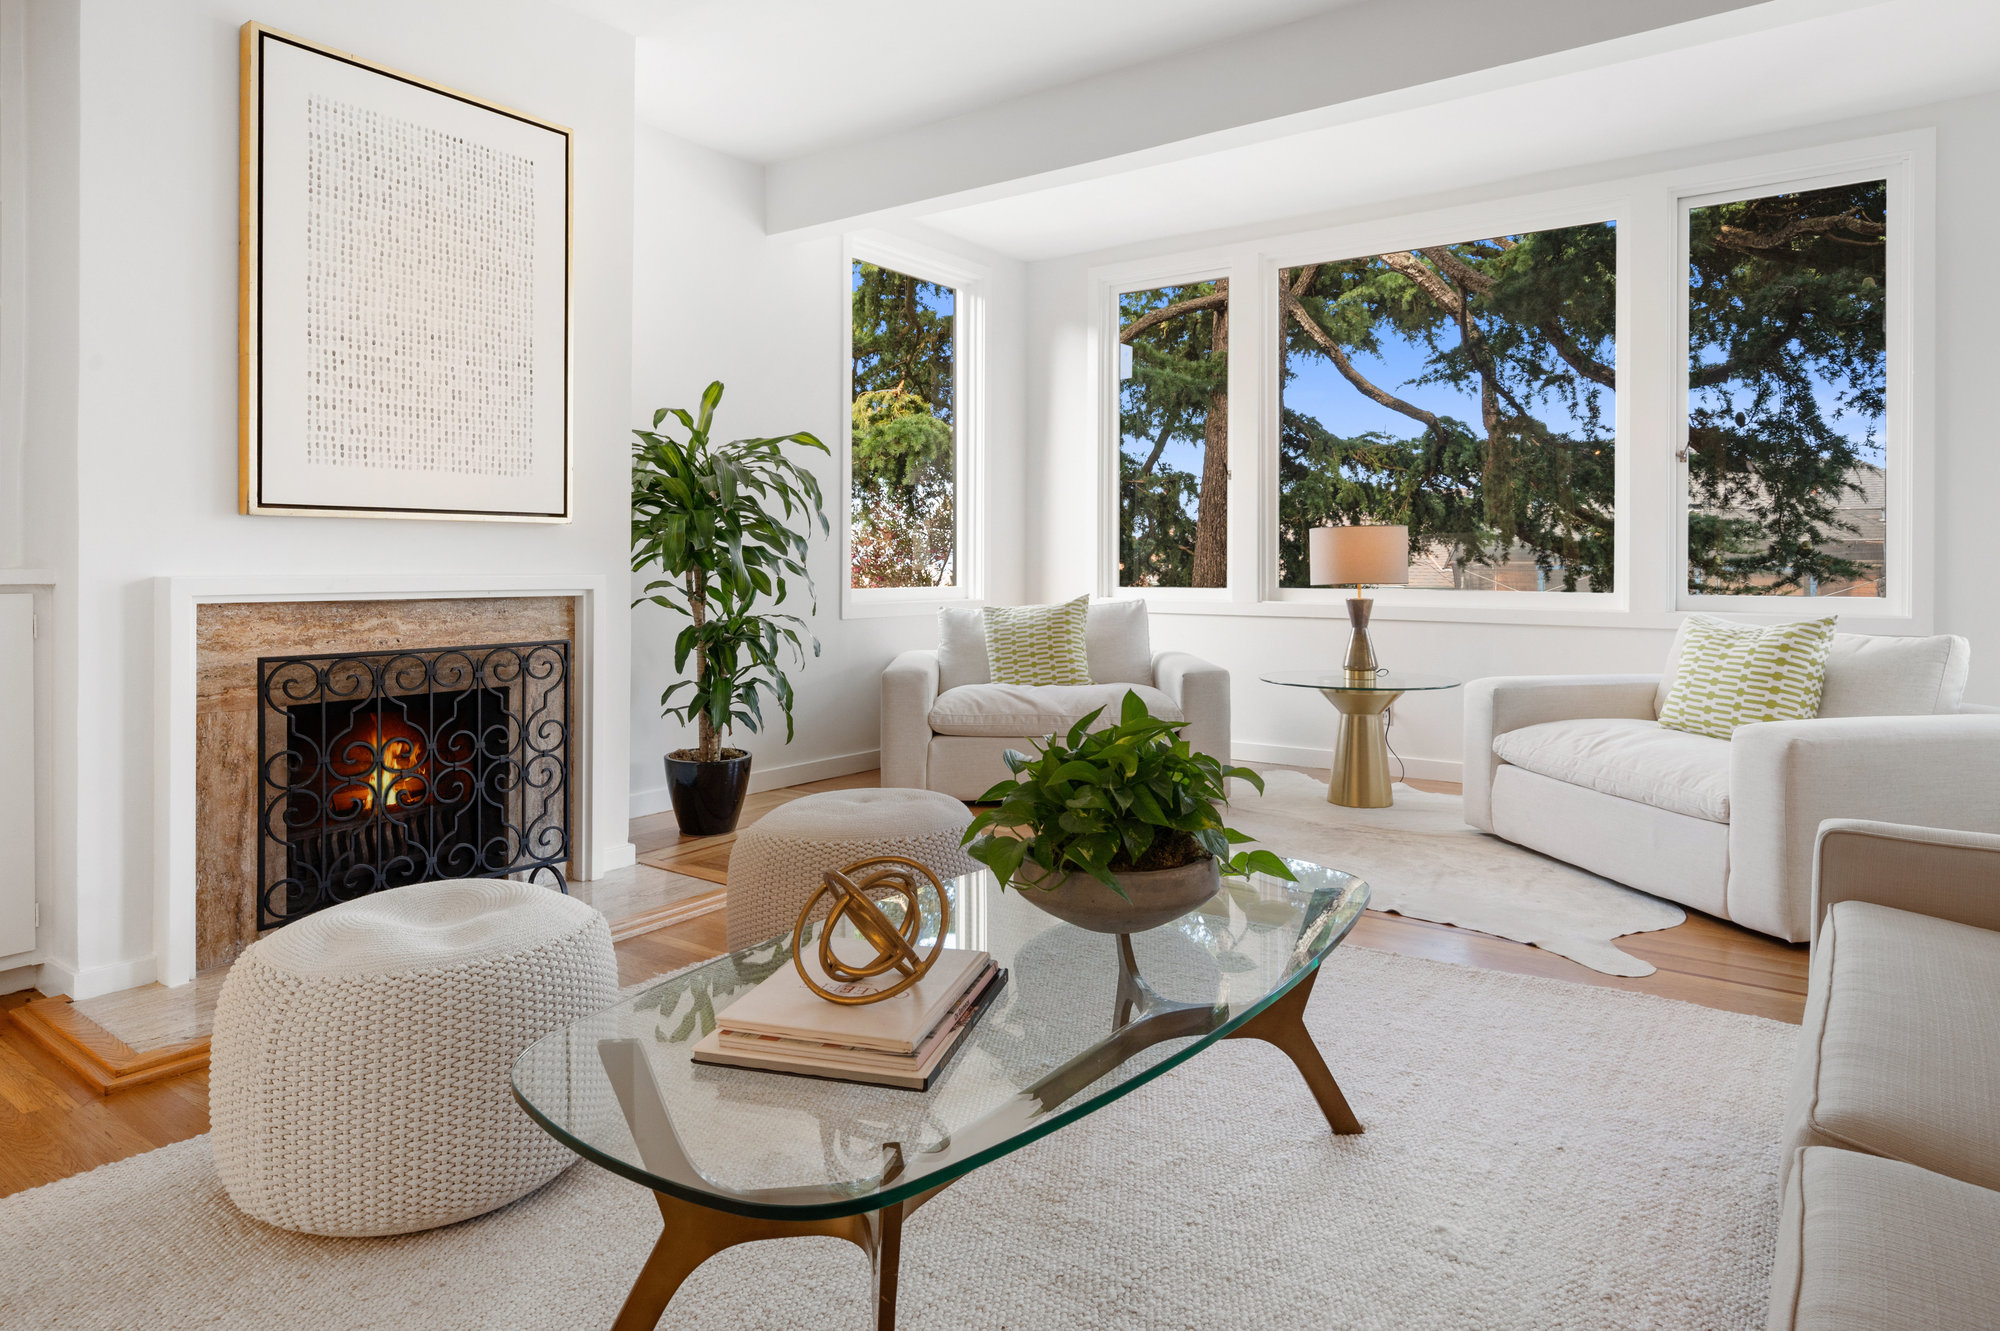 Property Photo: Close-up of the fireplace with wood surround, and wrap-around windows 